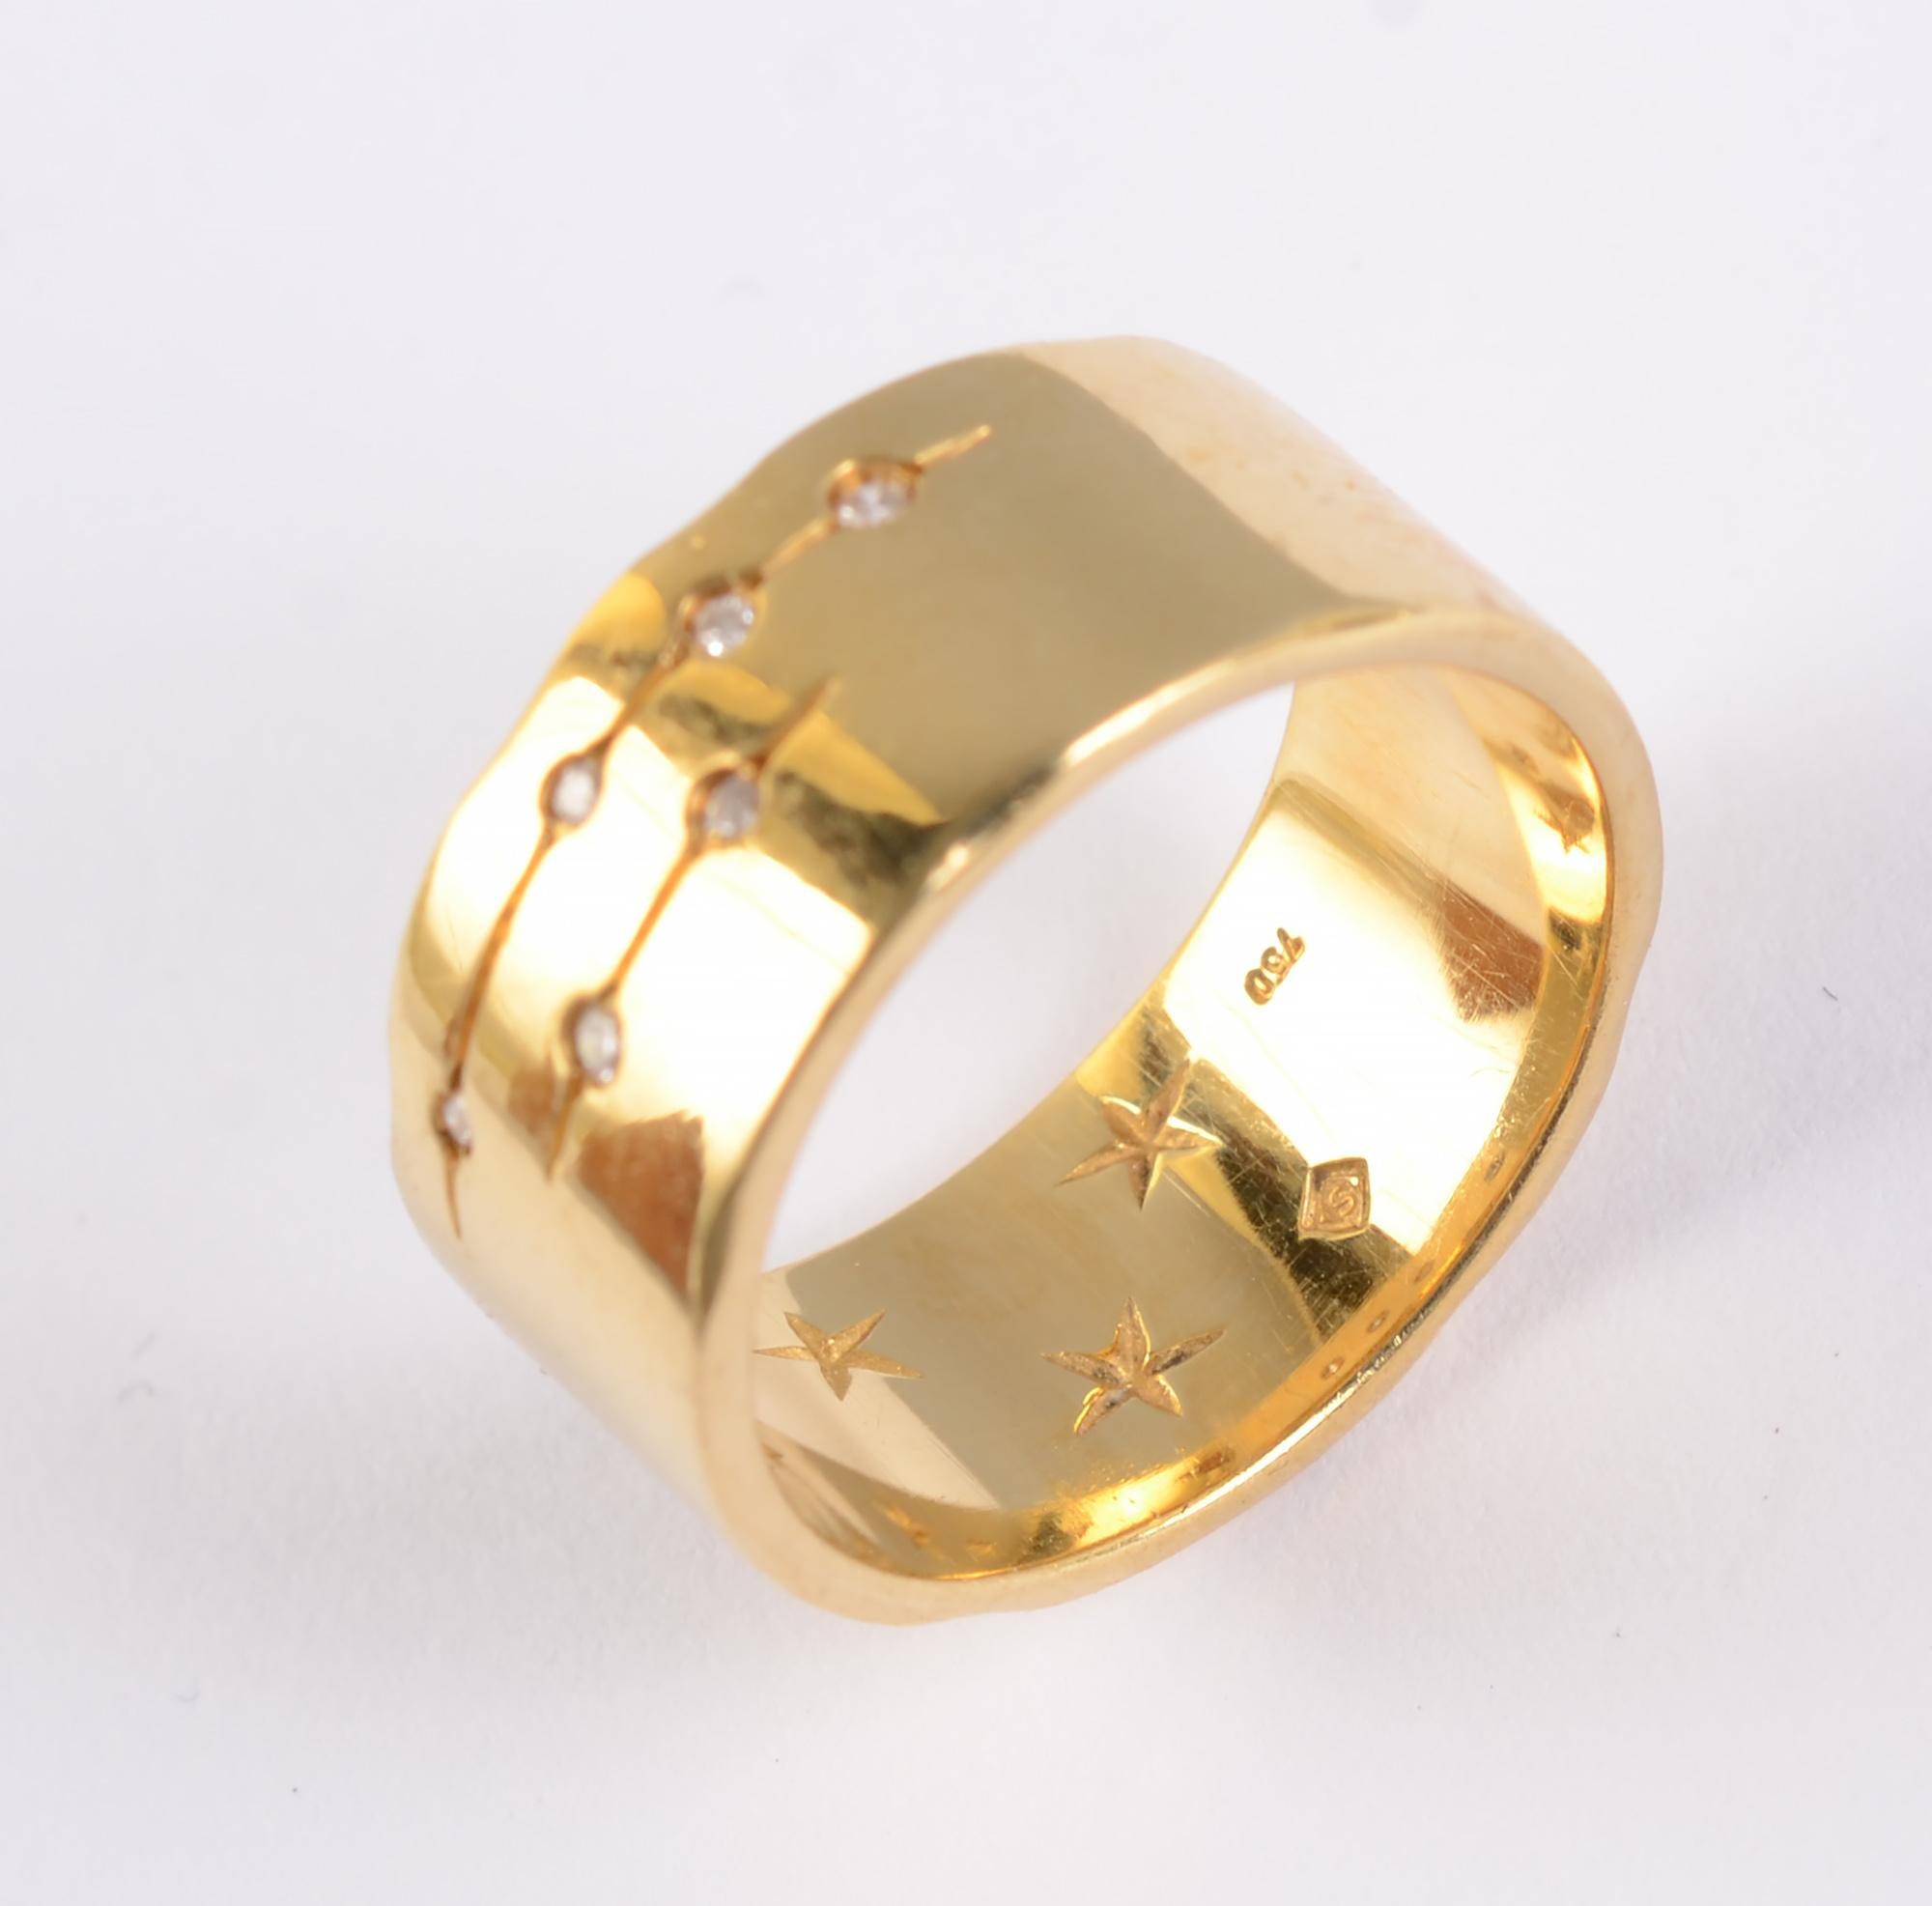 Wide band gold ring with diamonds by Brazilian jeweler, H. Stern. The ring is from their Code collection in which the six small, irregularly placed diamonds are meant to create an enigmatic pattern. It is a reference to secret codes that can only be